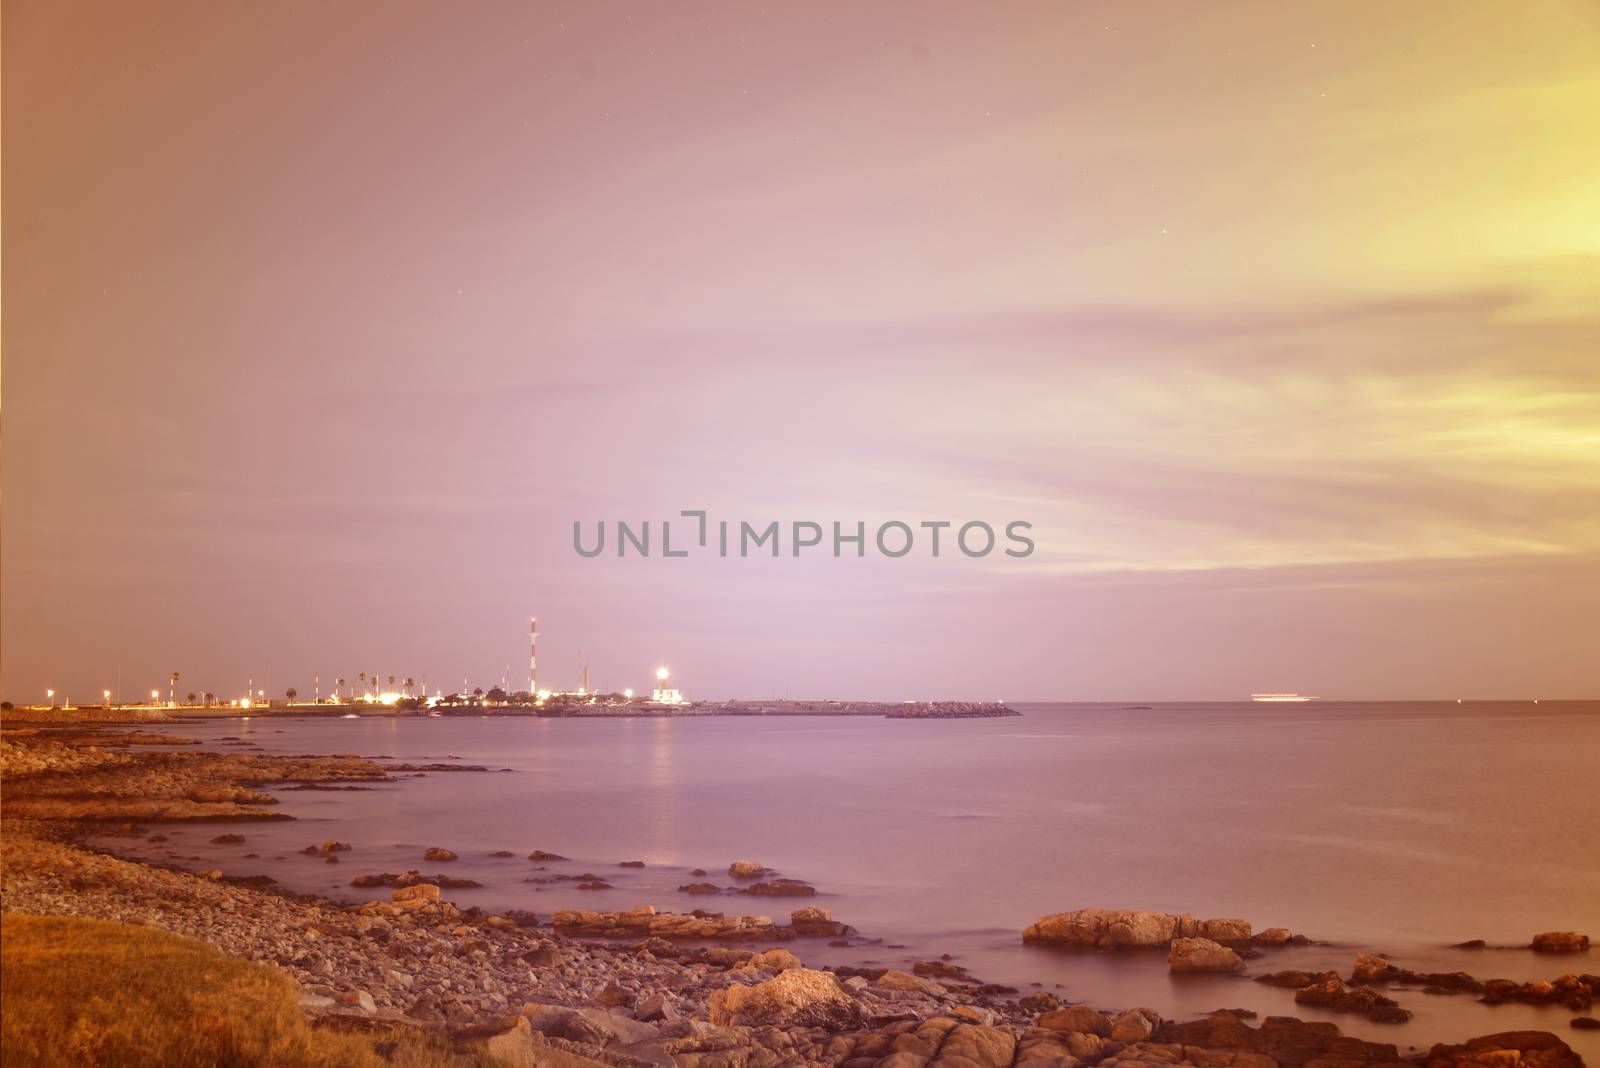 Vintage summer seashore cityscape. Chill out moment concept photography